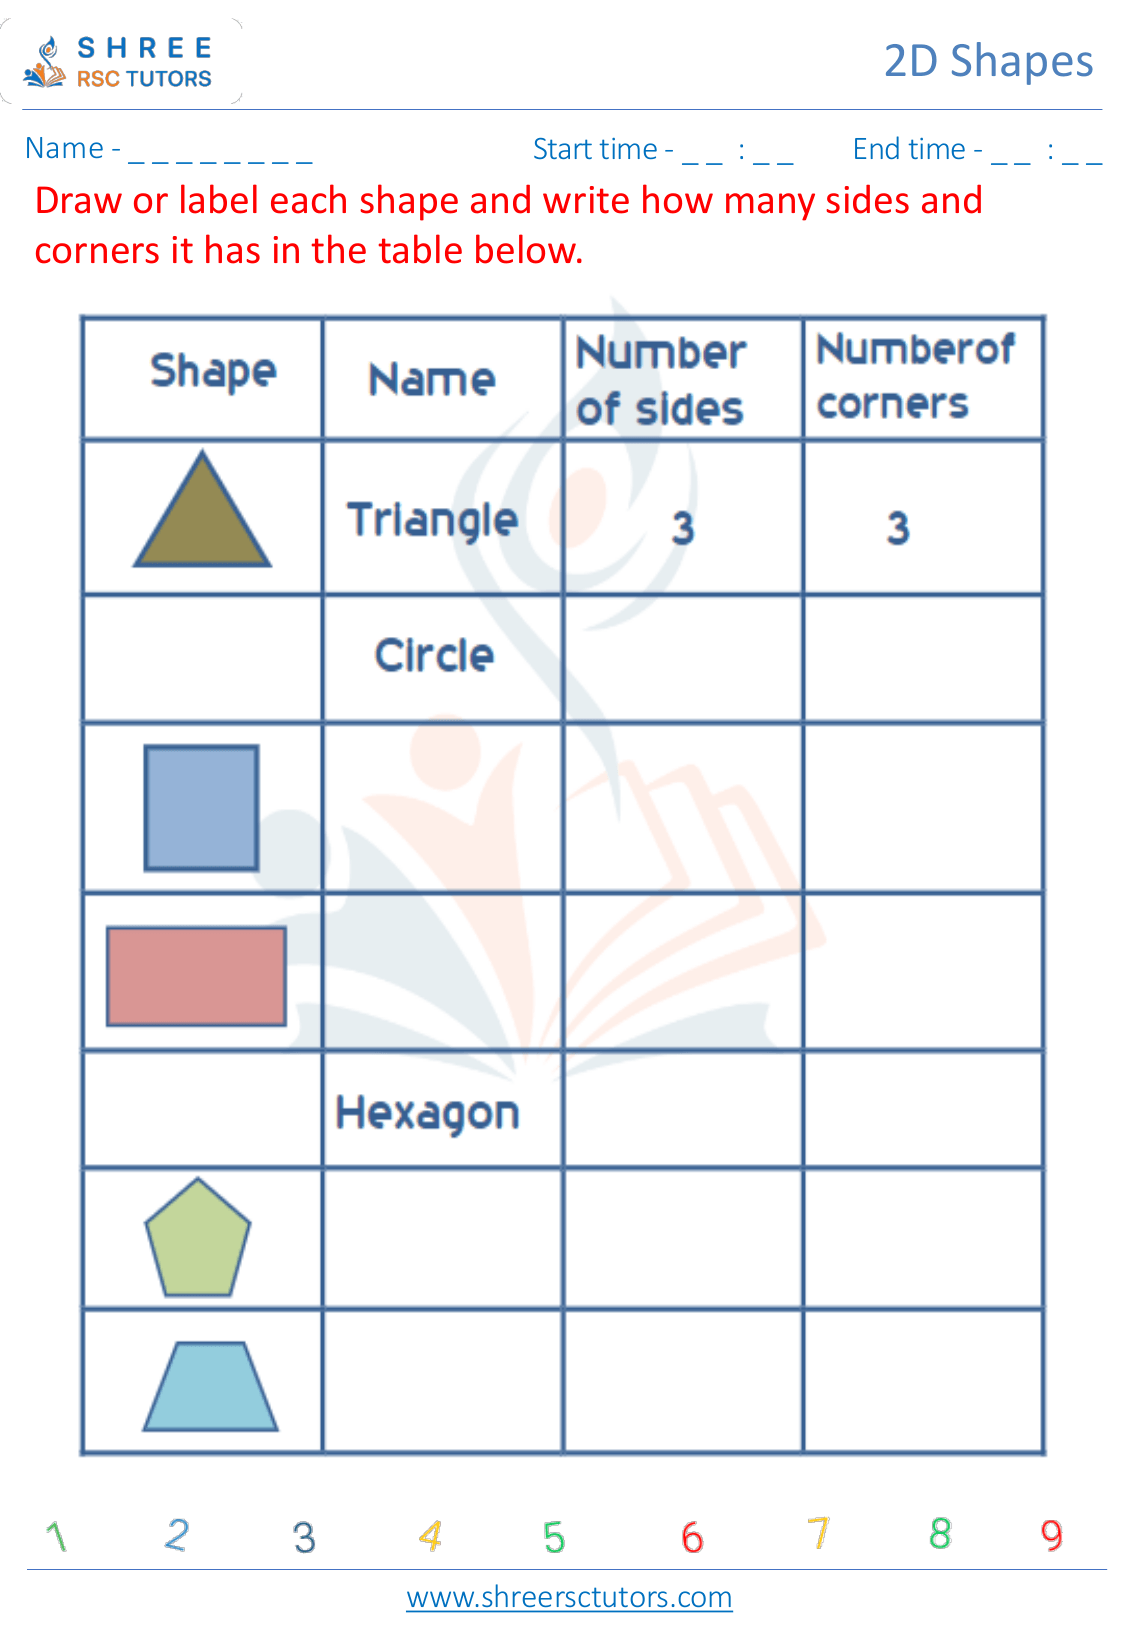 Kindergarten  Maths worksheet: Geometric shapes - Identify and Draw 2D Shapes